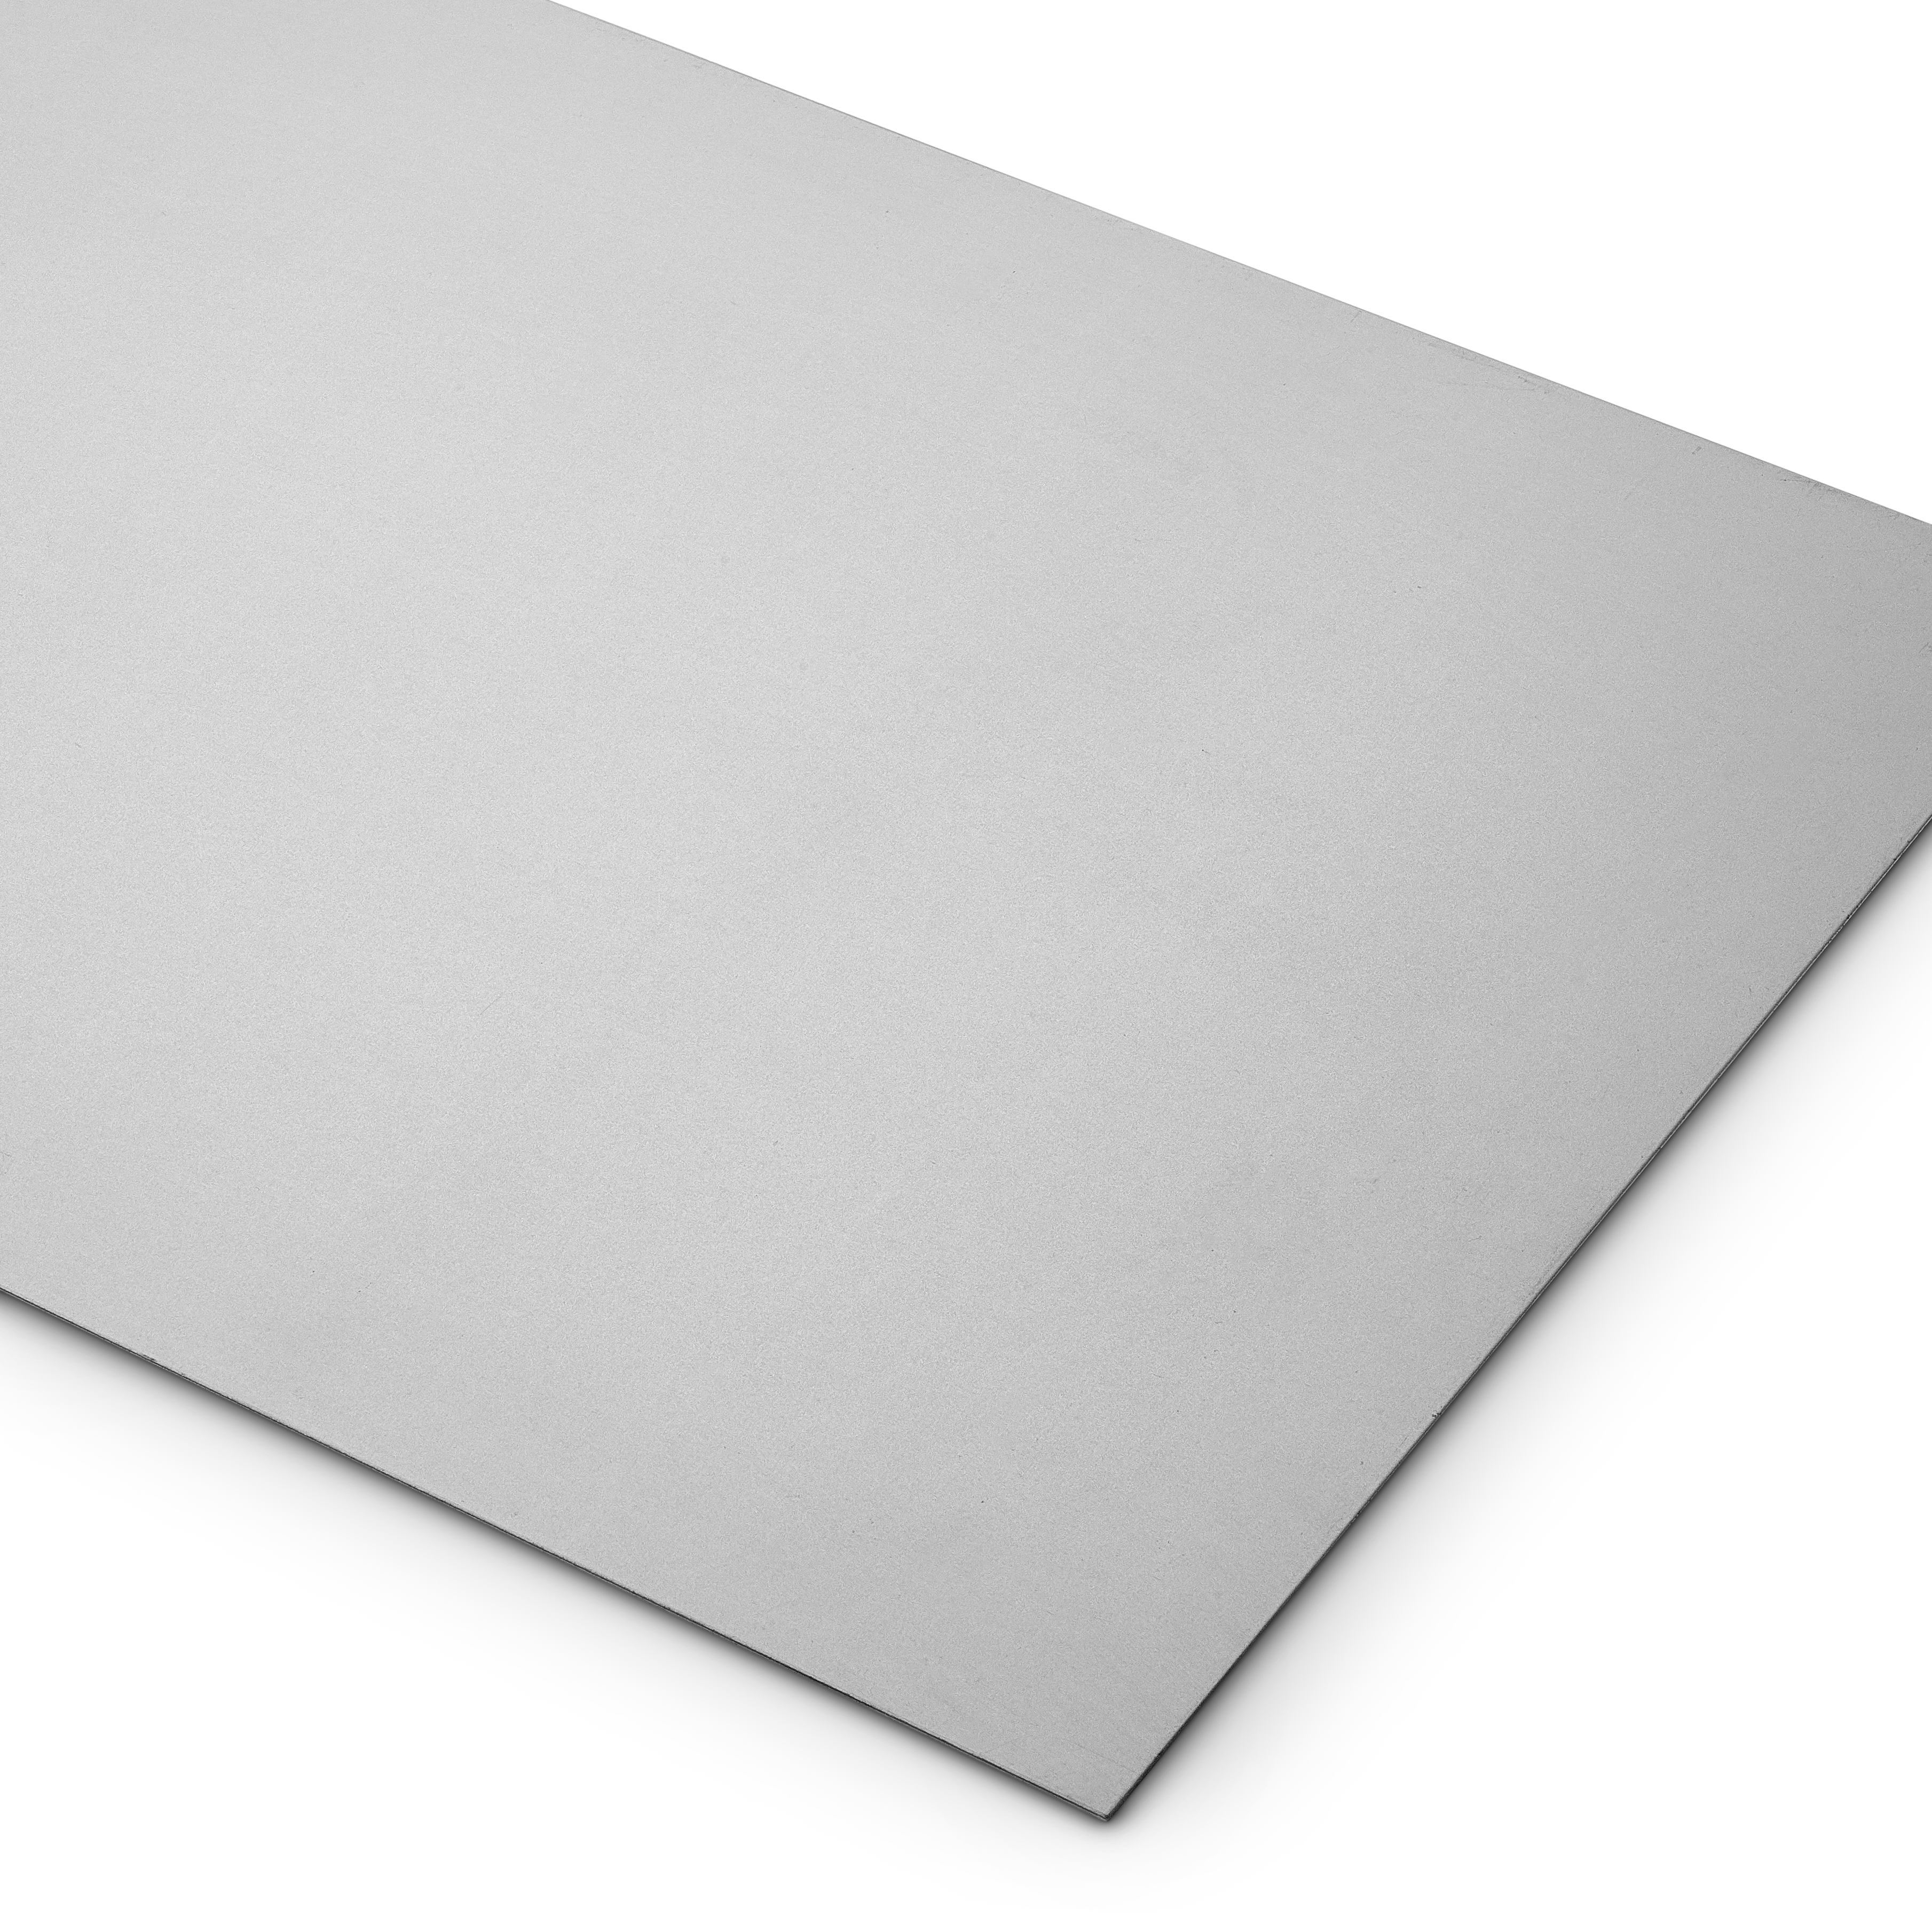 1.5mm cold rolled cr4 steel sheet plate various sizes thin metal